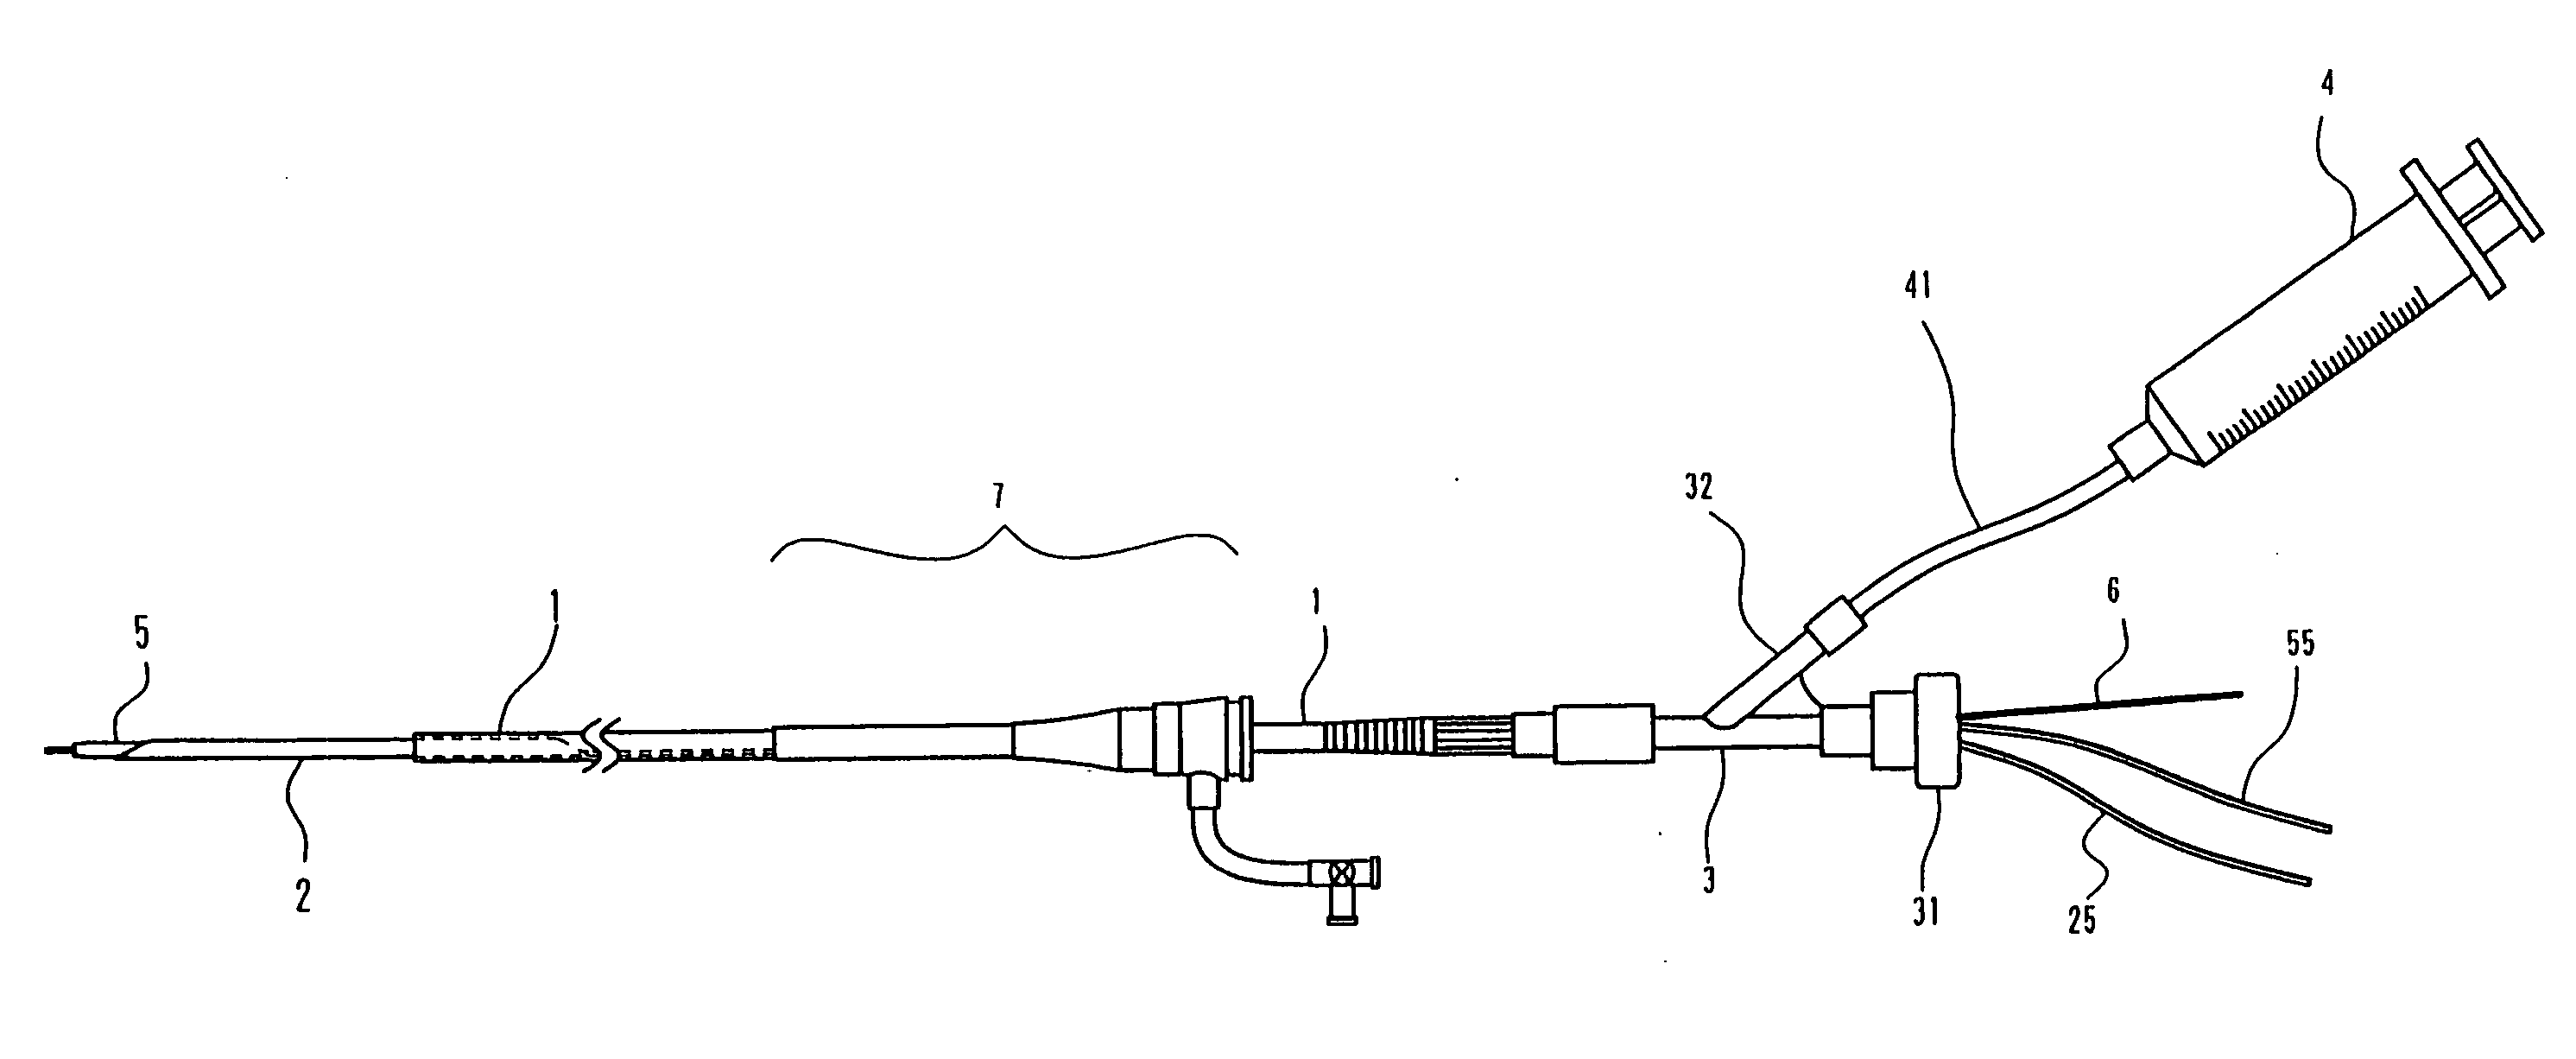 Intravascular foreign matter suction assembly